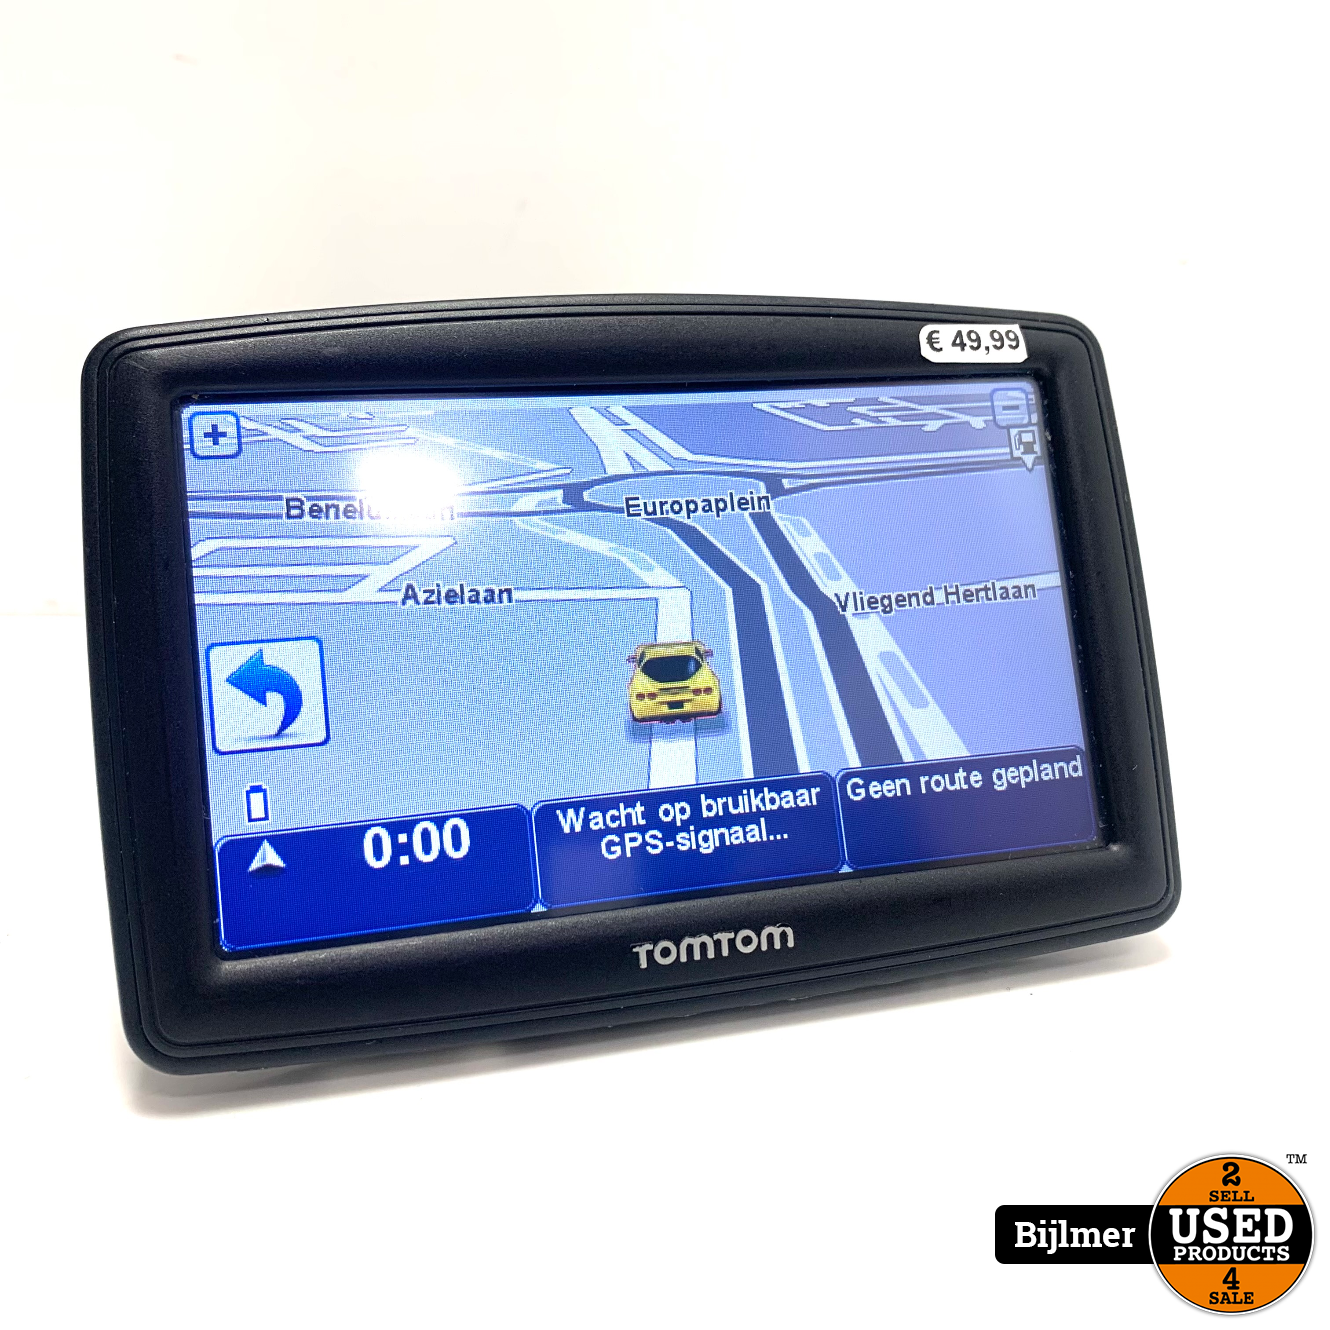 TomTom XXL Classic - Used Products Amsterdam